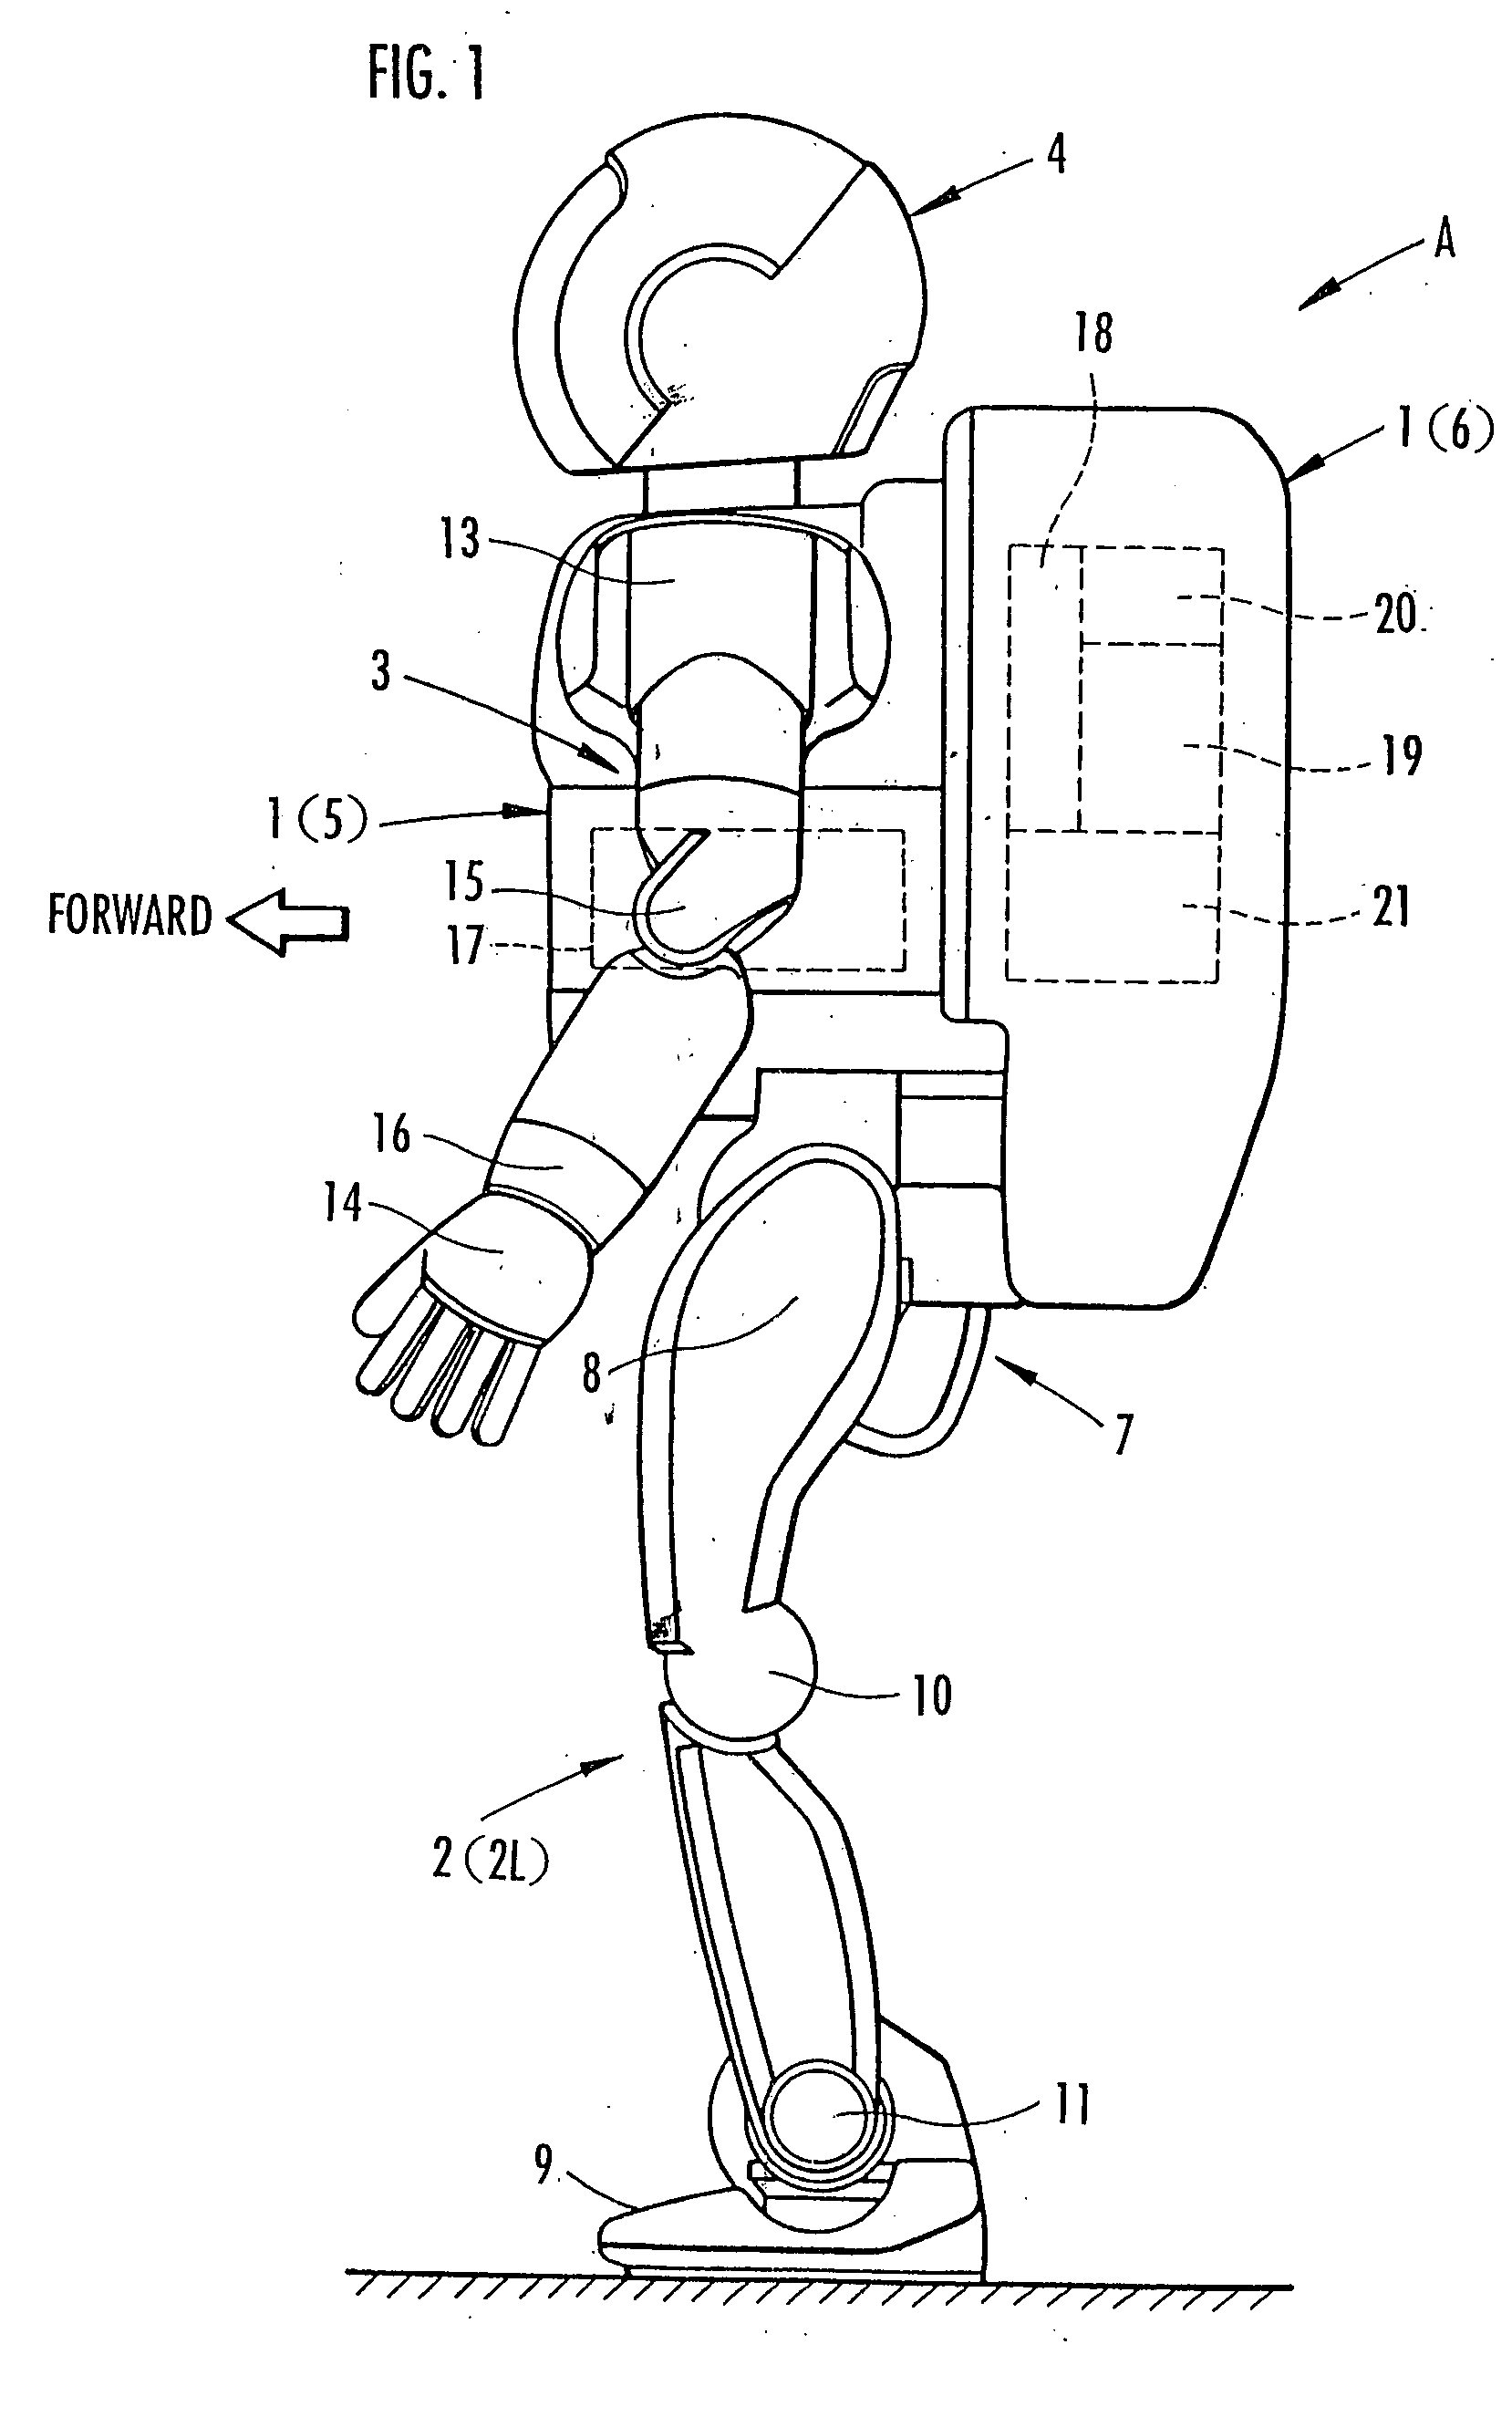 Remote control device of bipedal mobile robot